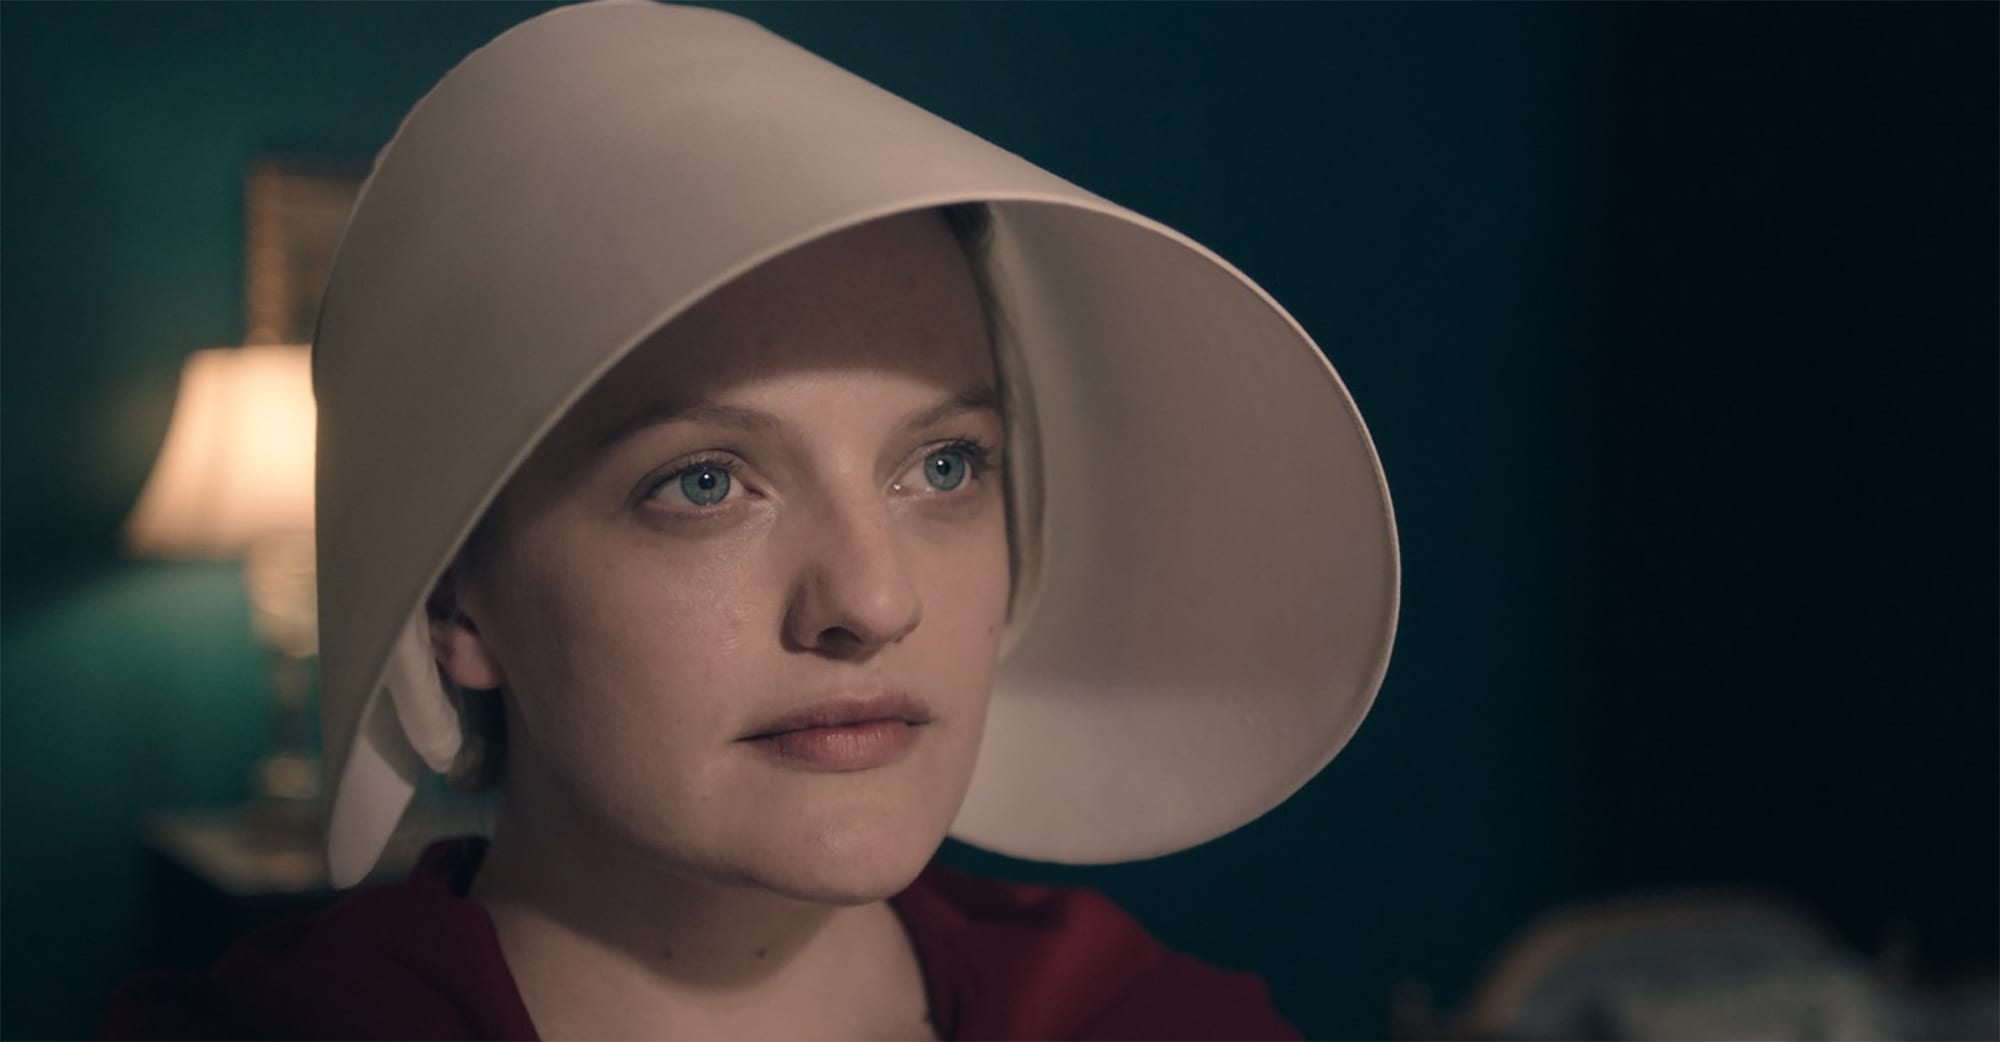 Considering how terrifying the second season of 'The Handmaid’s Tale' has been – including some chilling foreshadowing of real-life tragedies and political events – we’re hesitant to say we’re excited to see what misery the show has in store for us in S3.